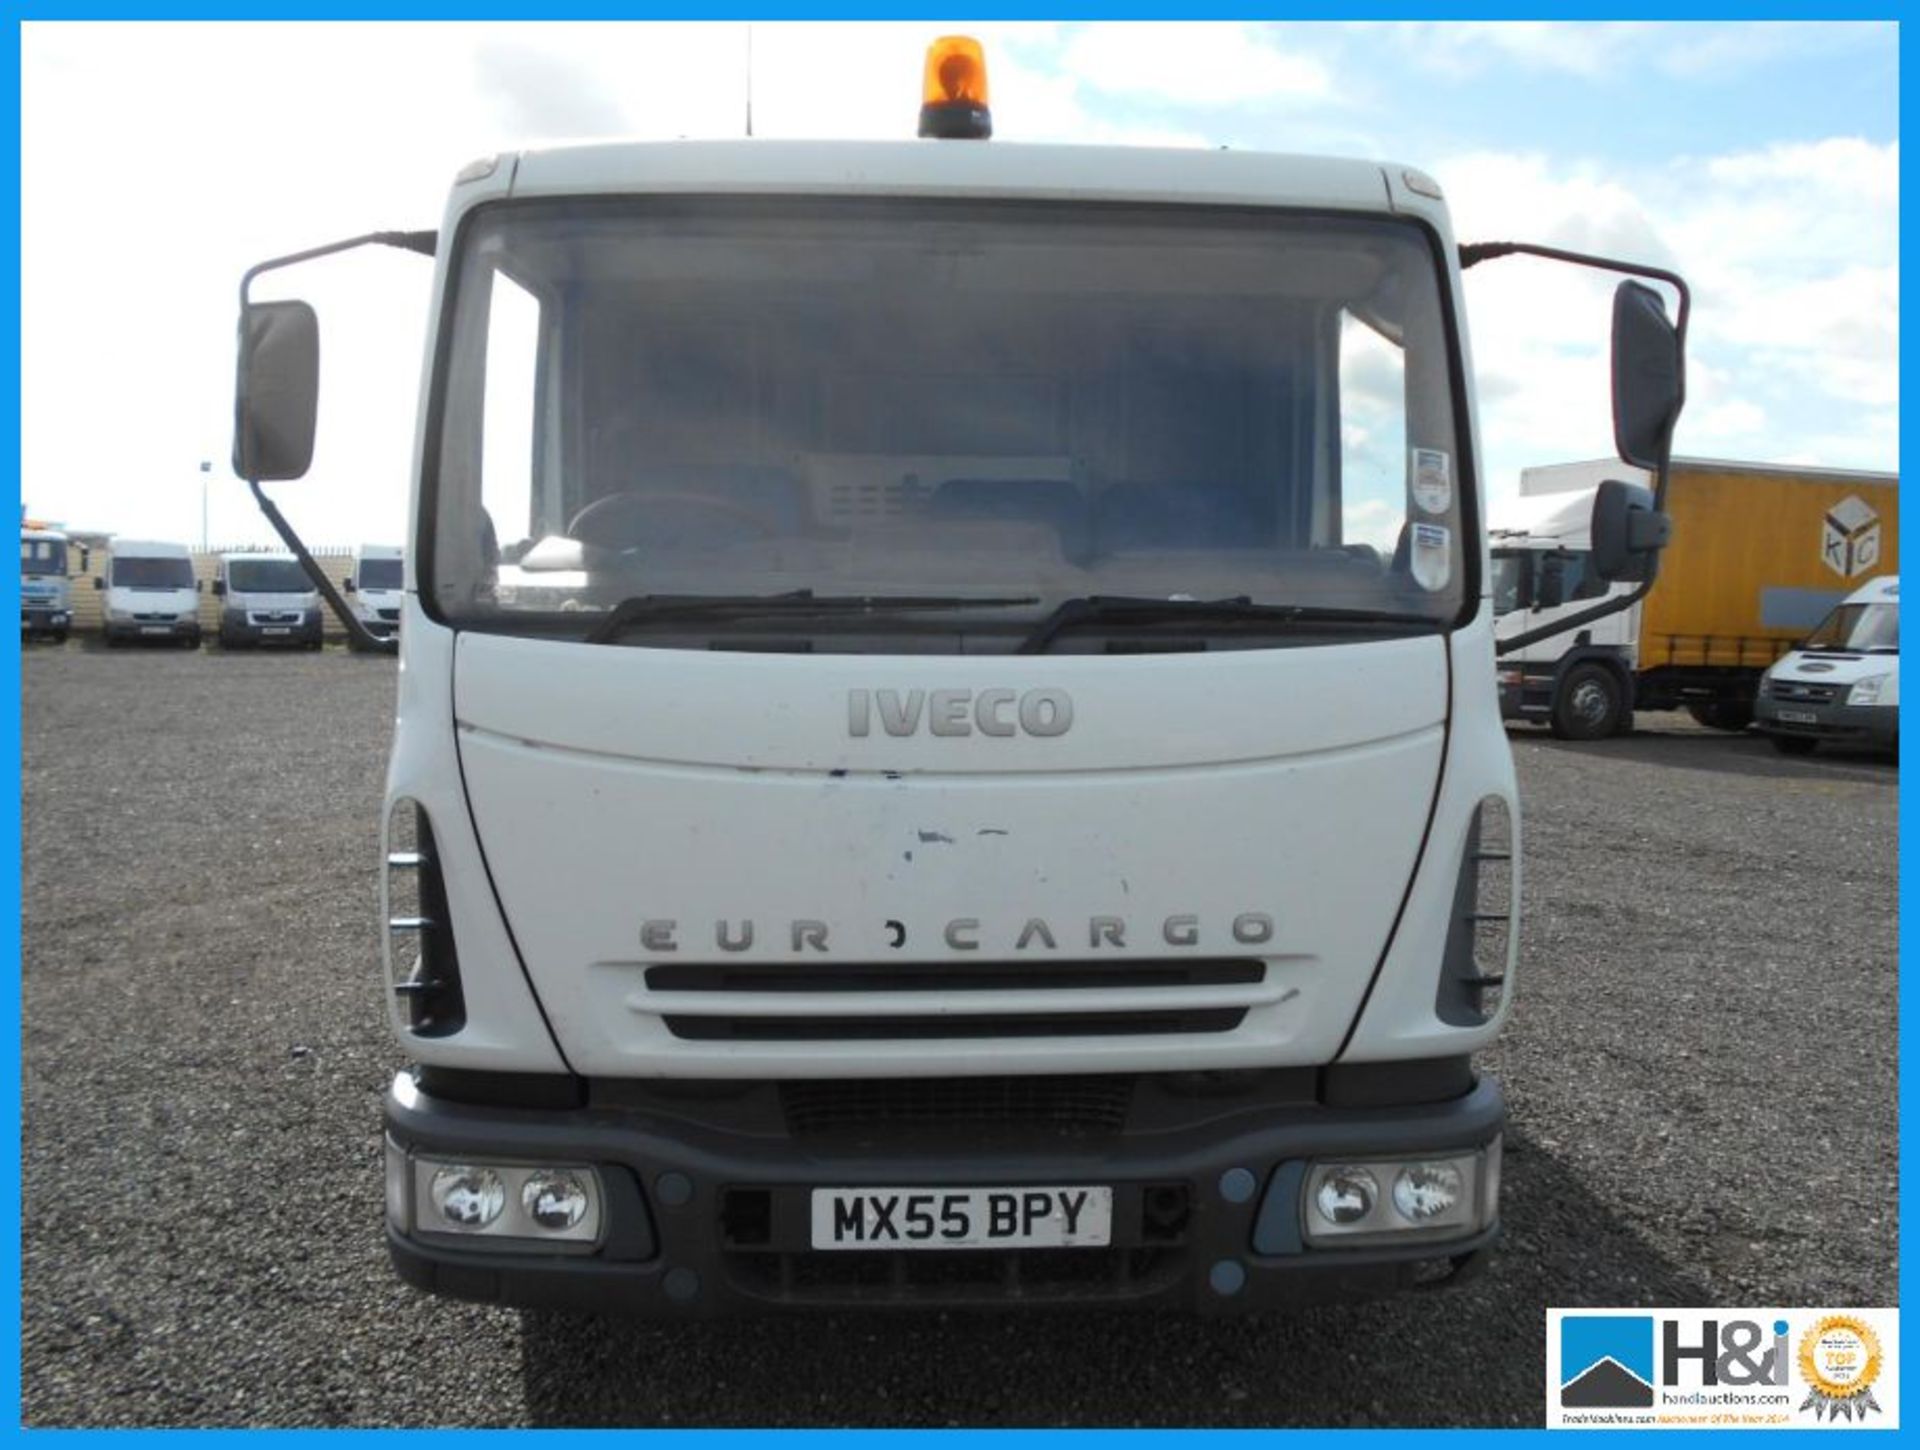 2005 '55' REG. IVECO FORD EURO CARGO 75E17. 20ft ALLOY DROPSIDE BODY. 566,500km. 2 OWNERS. MANUAL - Image 10 of 12